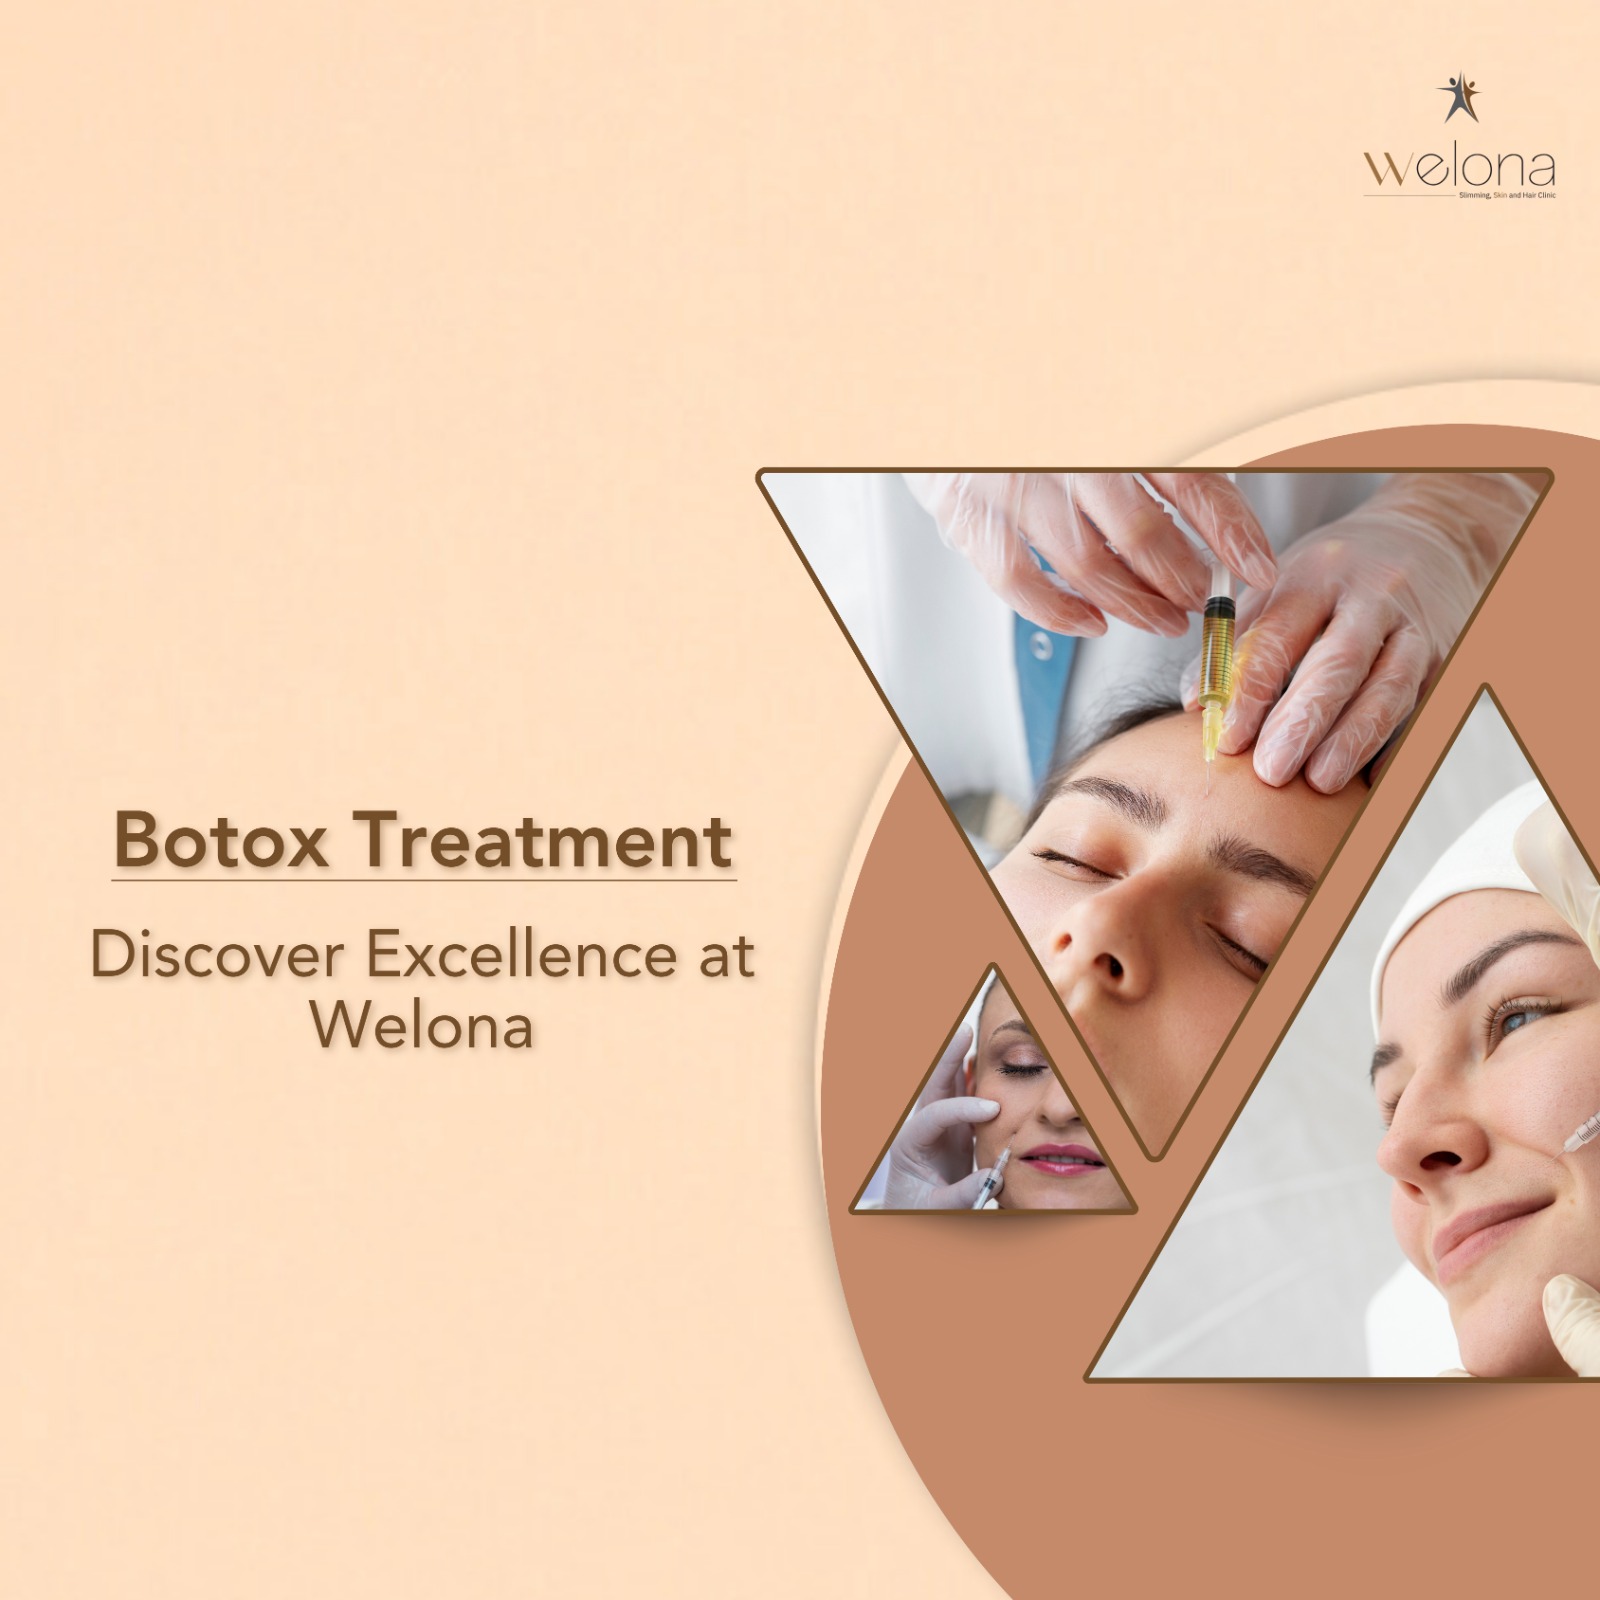 Botox Treatment: Discover Excellence at Welona